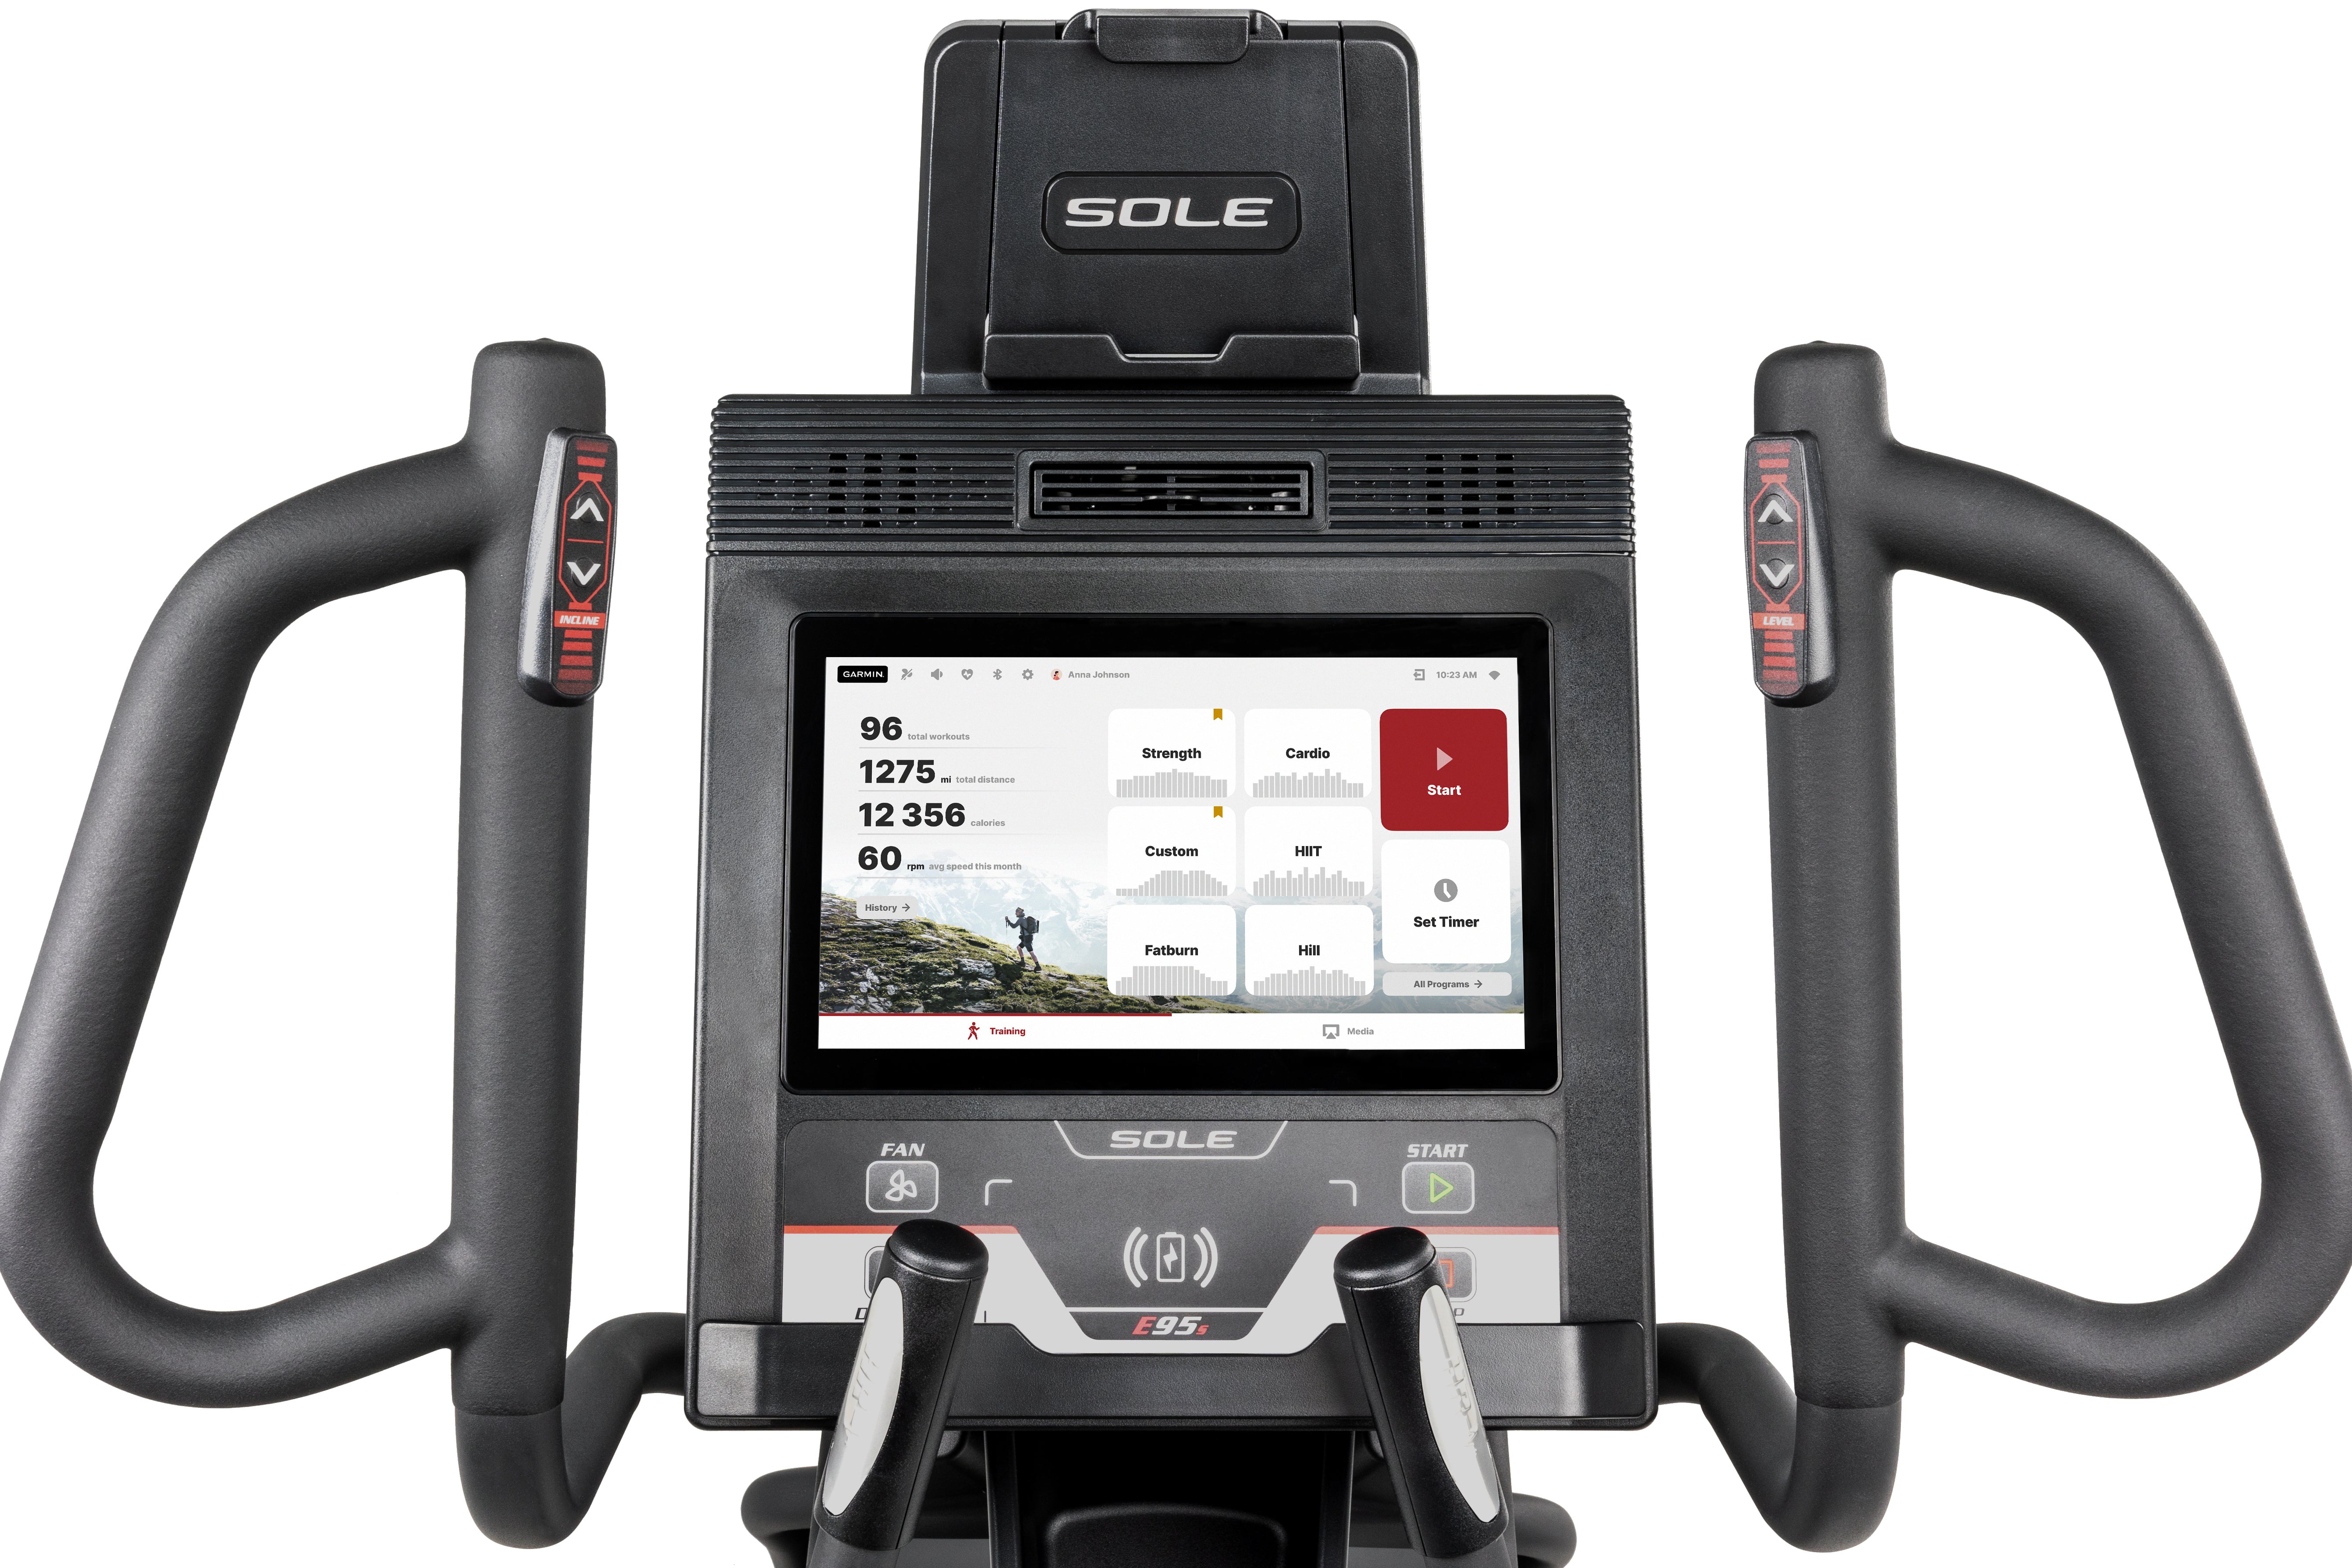 Close-up view of the Sole E95S elliptical machine's upper console, displaying a digital screen with workout metrics, adjustable handlebars with heart rate sensors, and dedicated buttons for easy navigation.